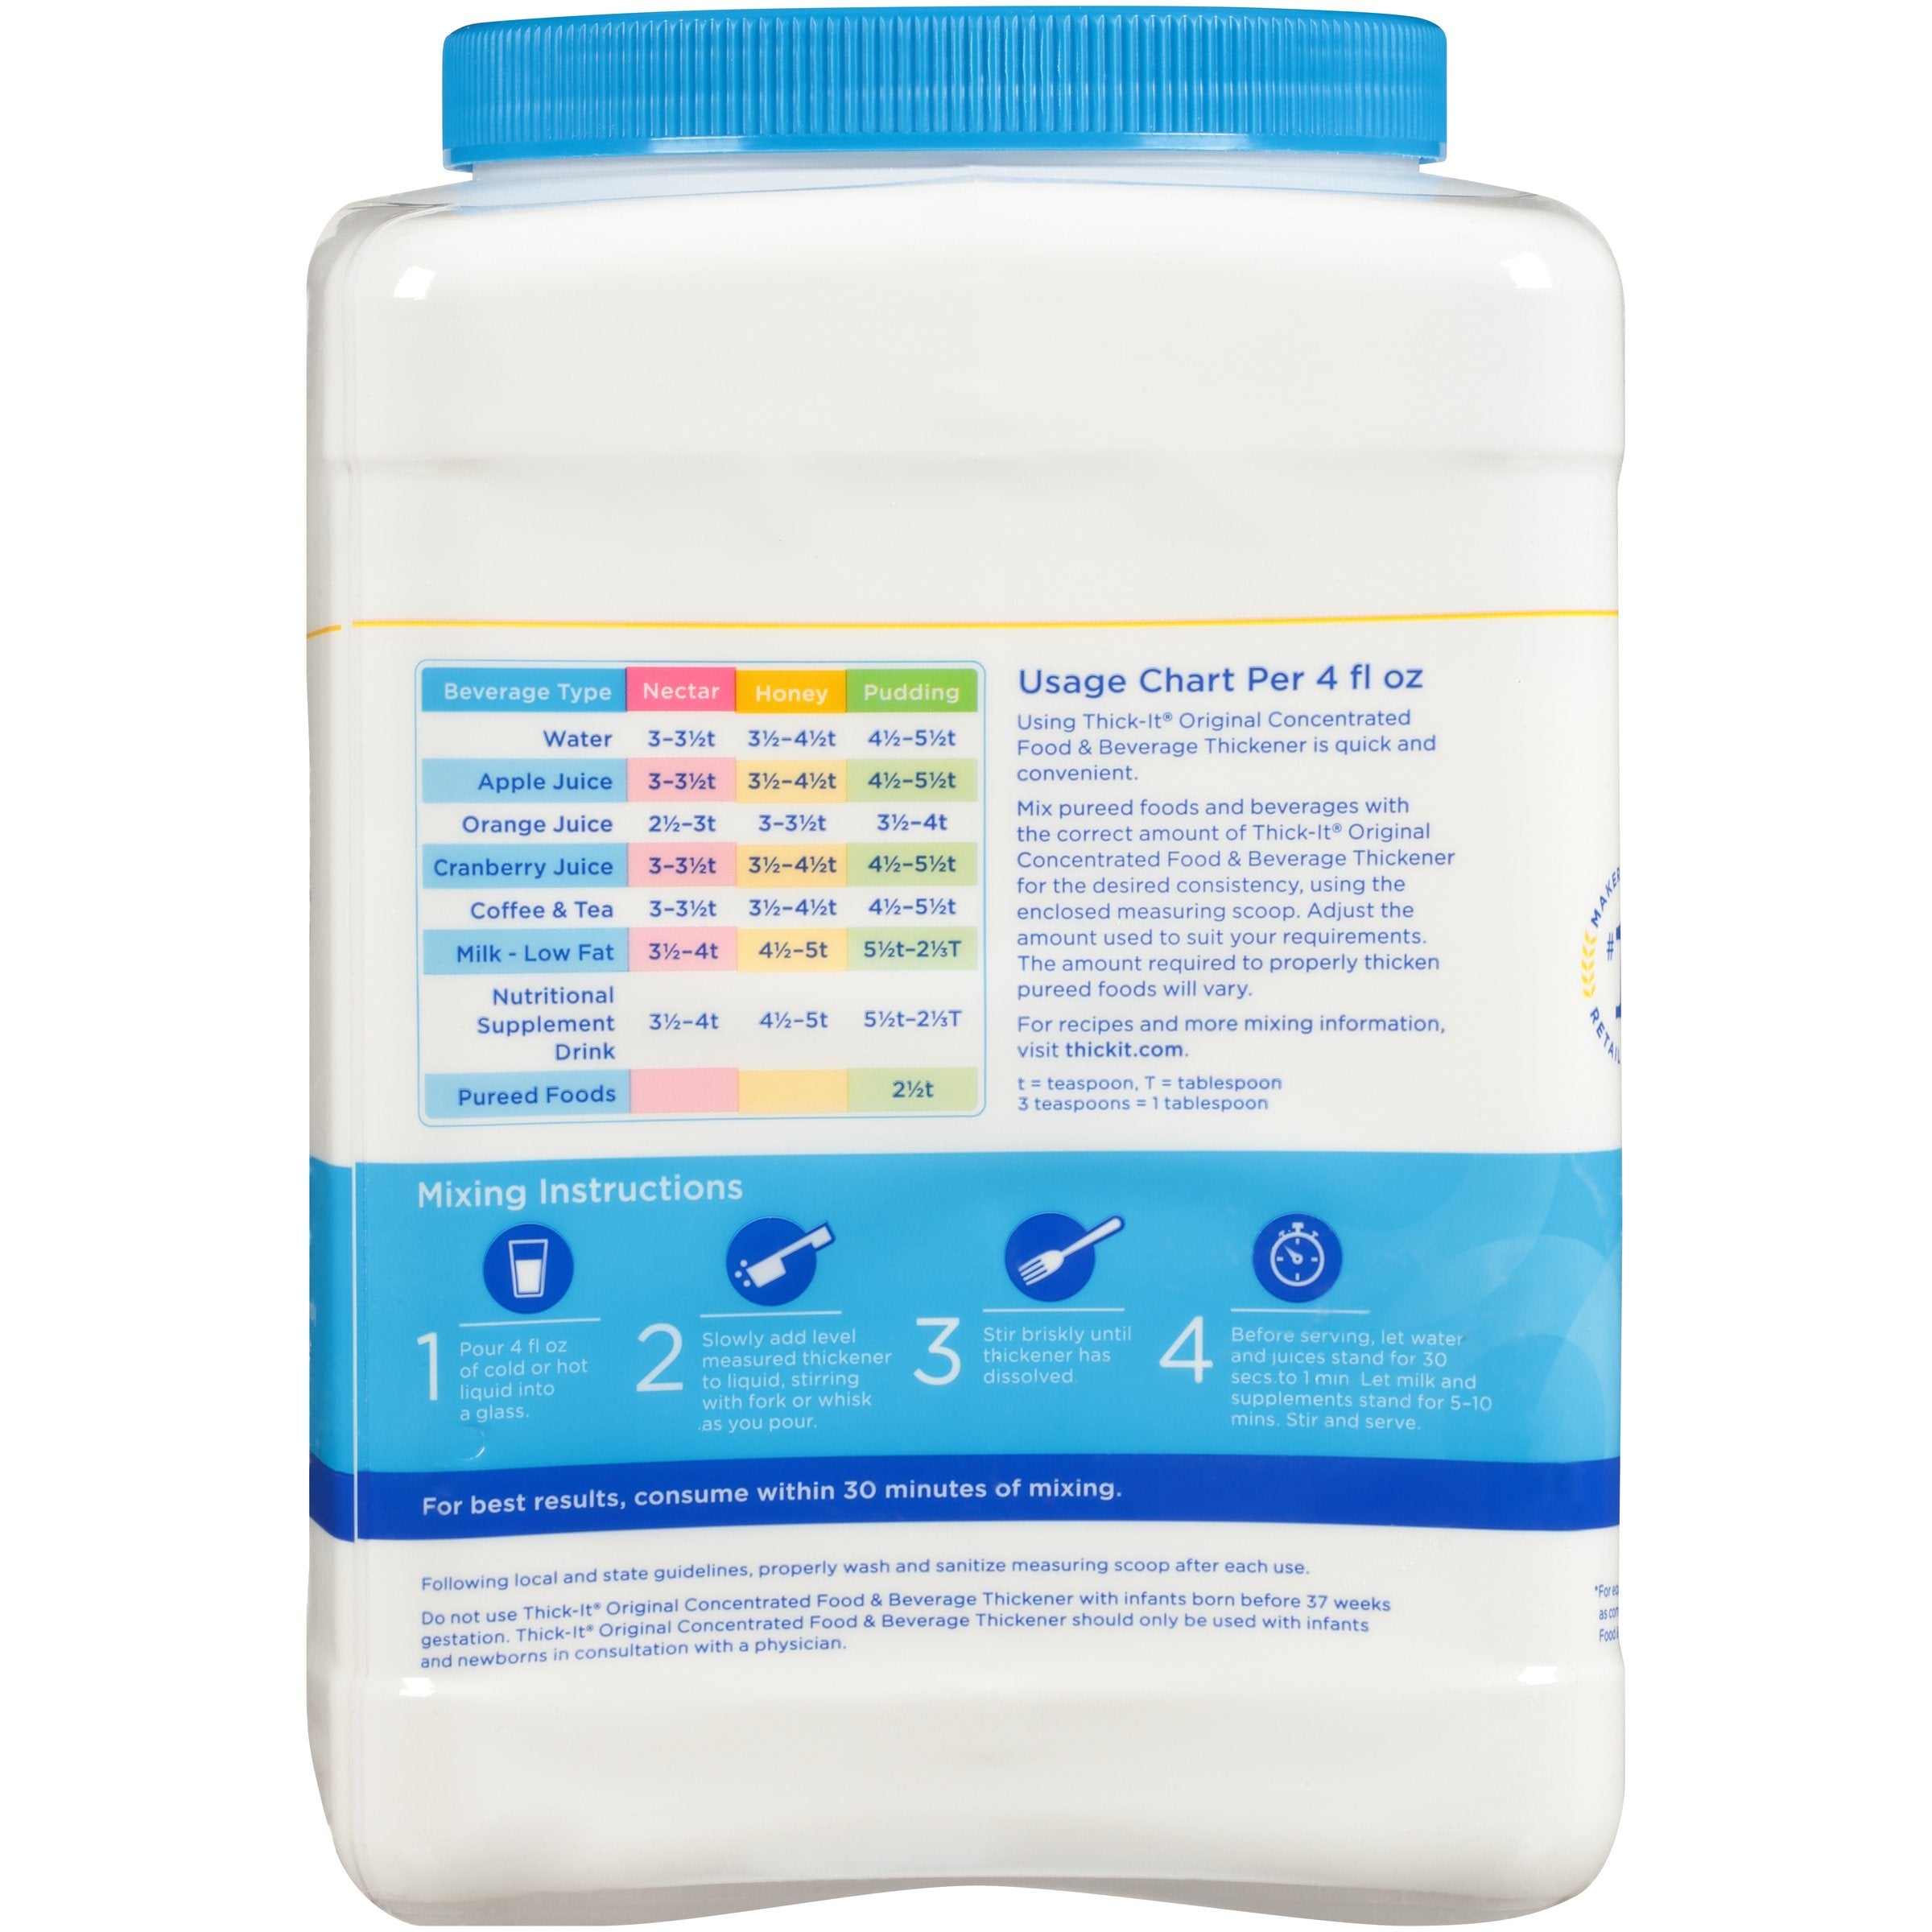 Food and Beverage Thickener Thick-It Original Concentrated 36 oz. Canister Unflavored Powder IDDSI Level 0 Thin